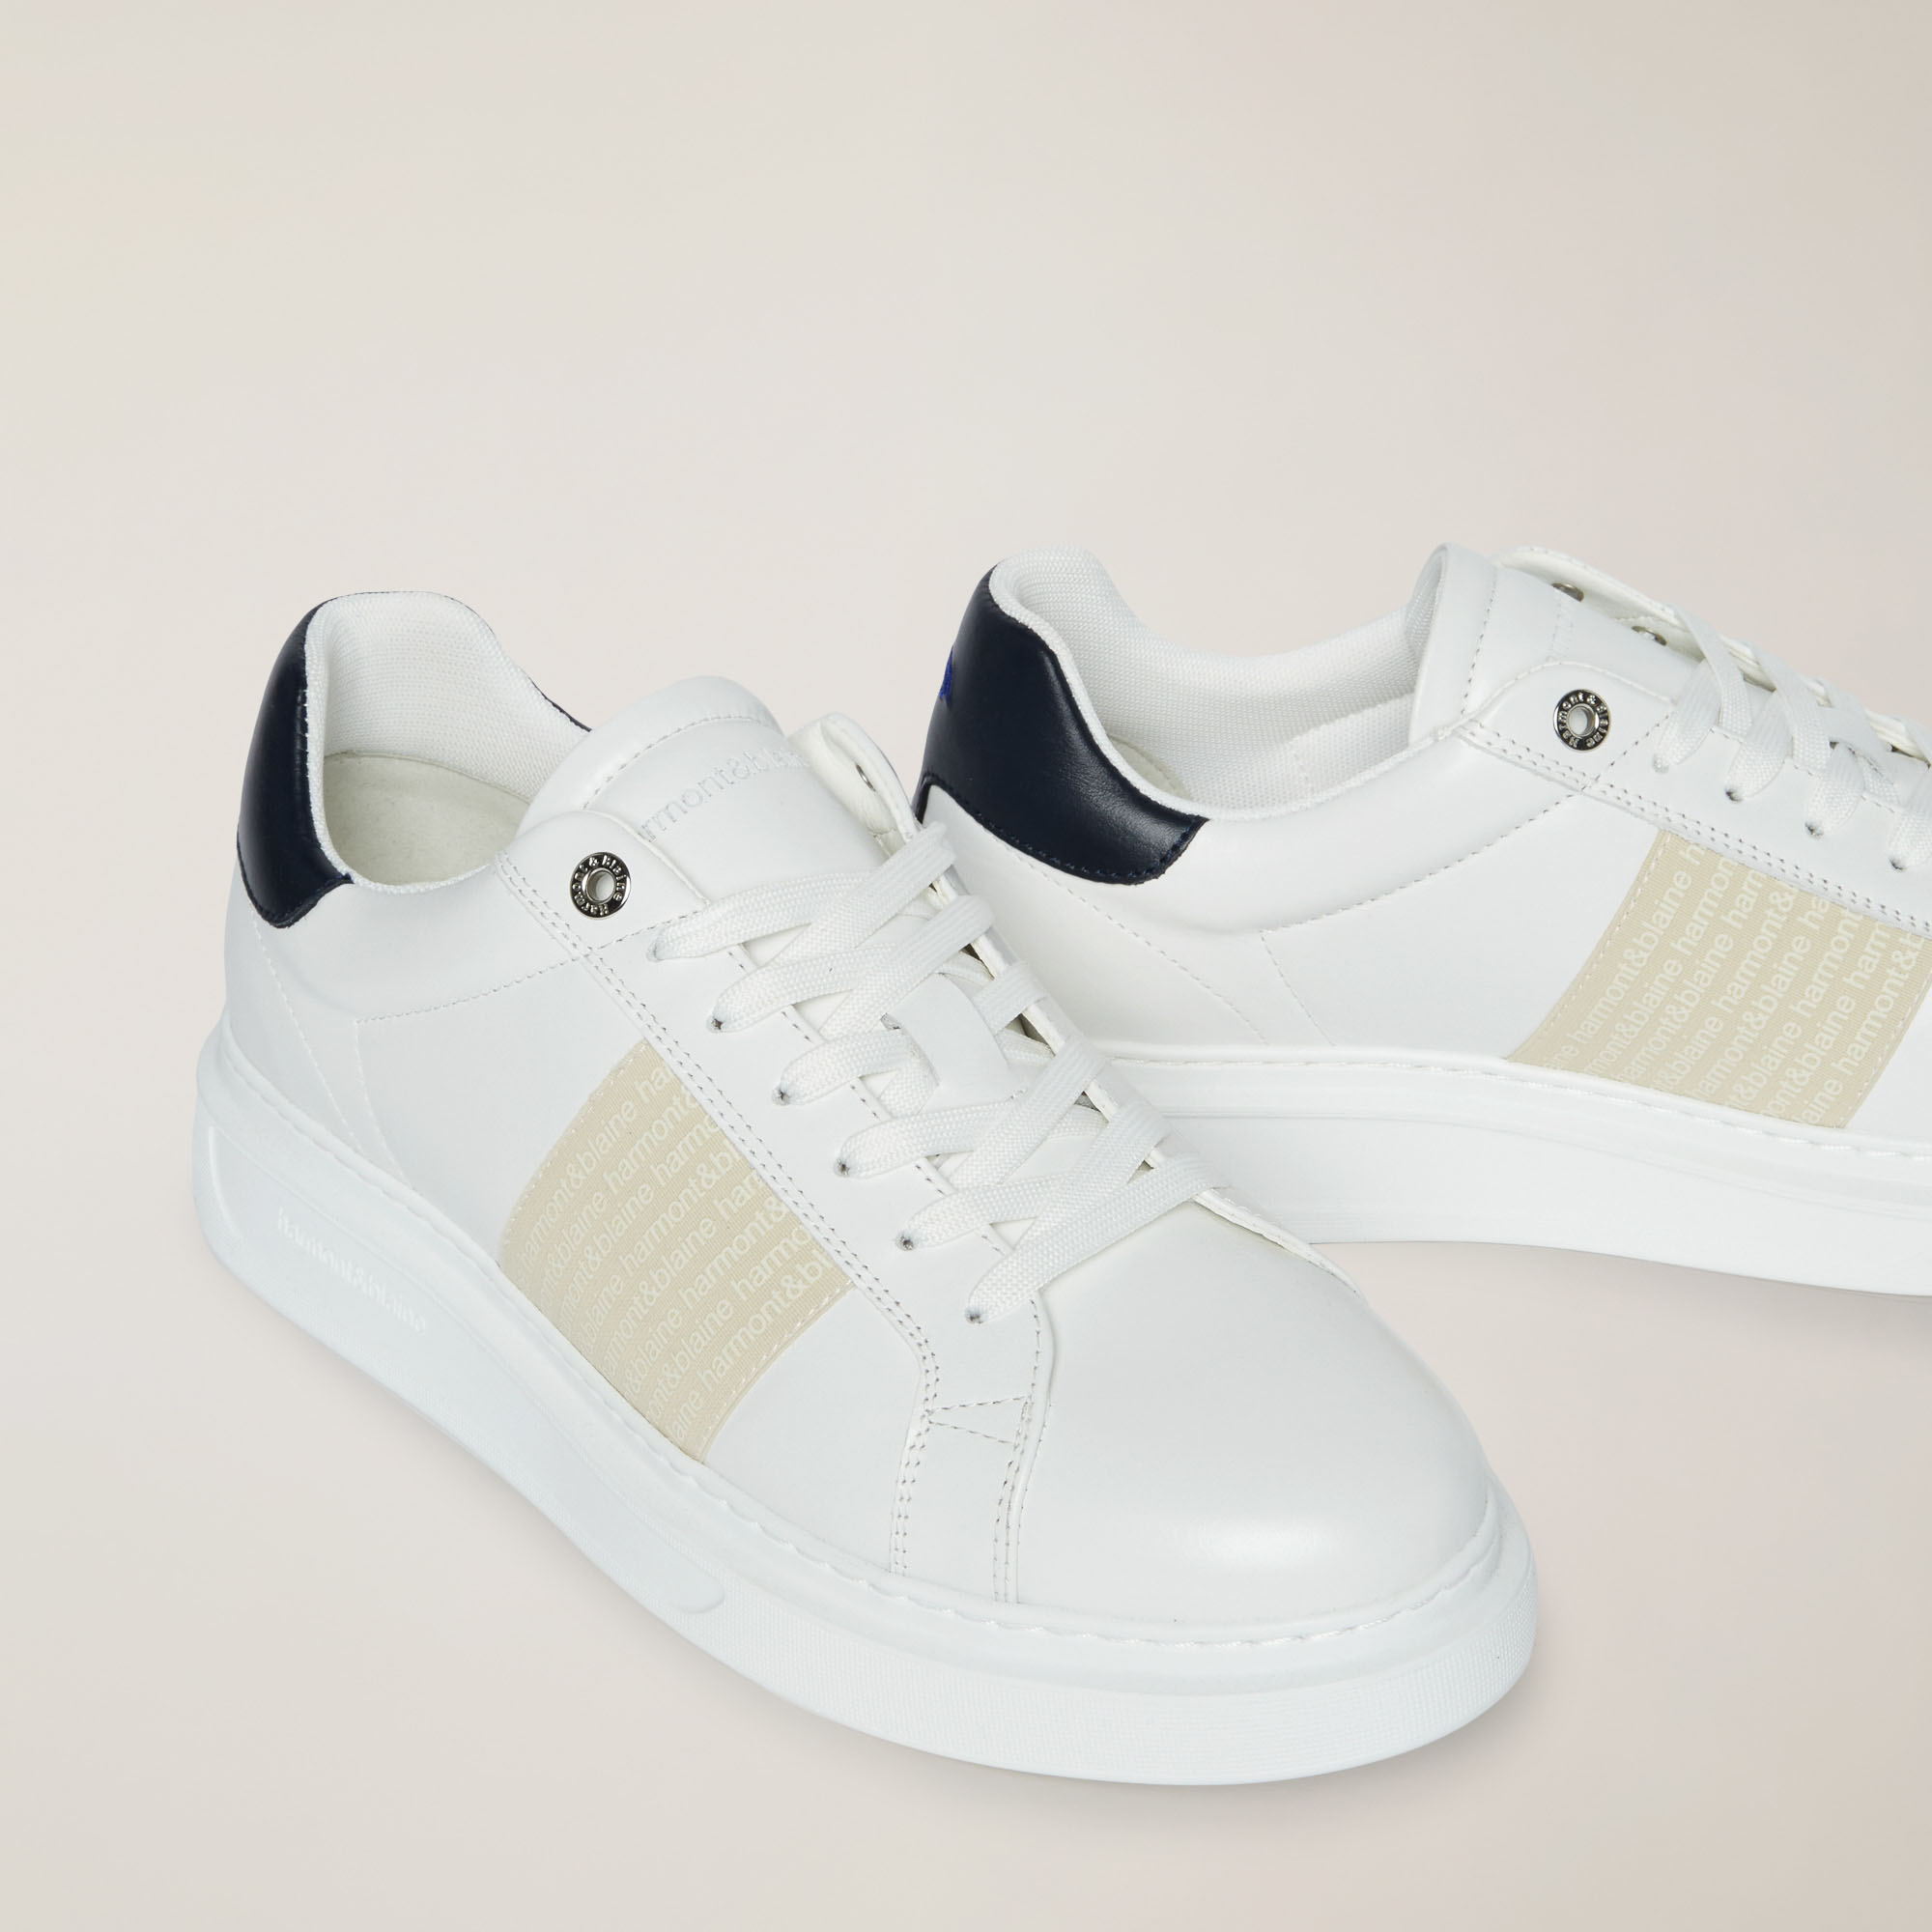 Sneaker Bold In Pelle, Bianco, large image number 3